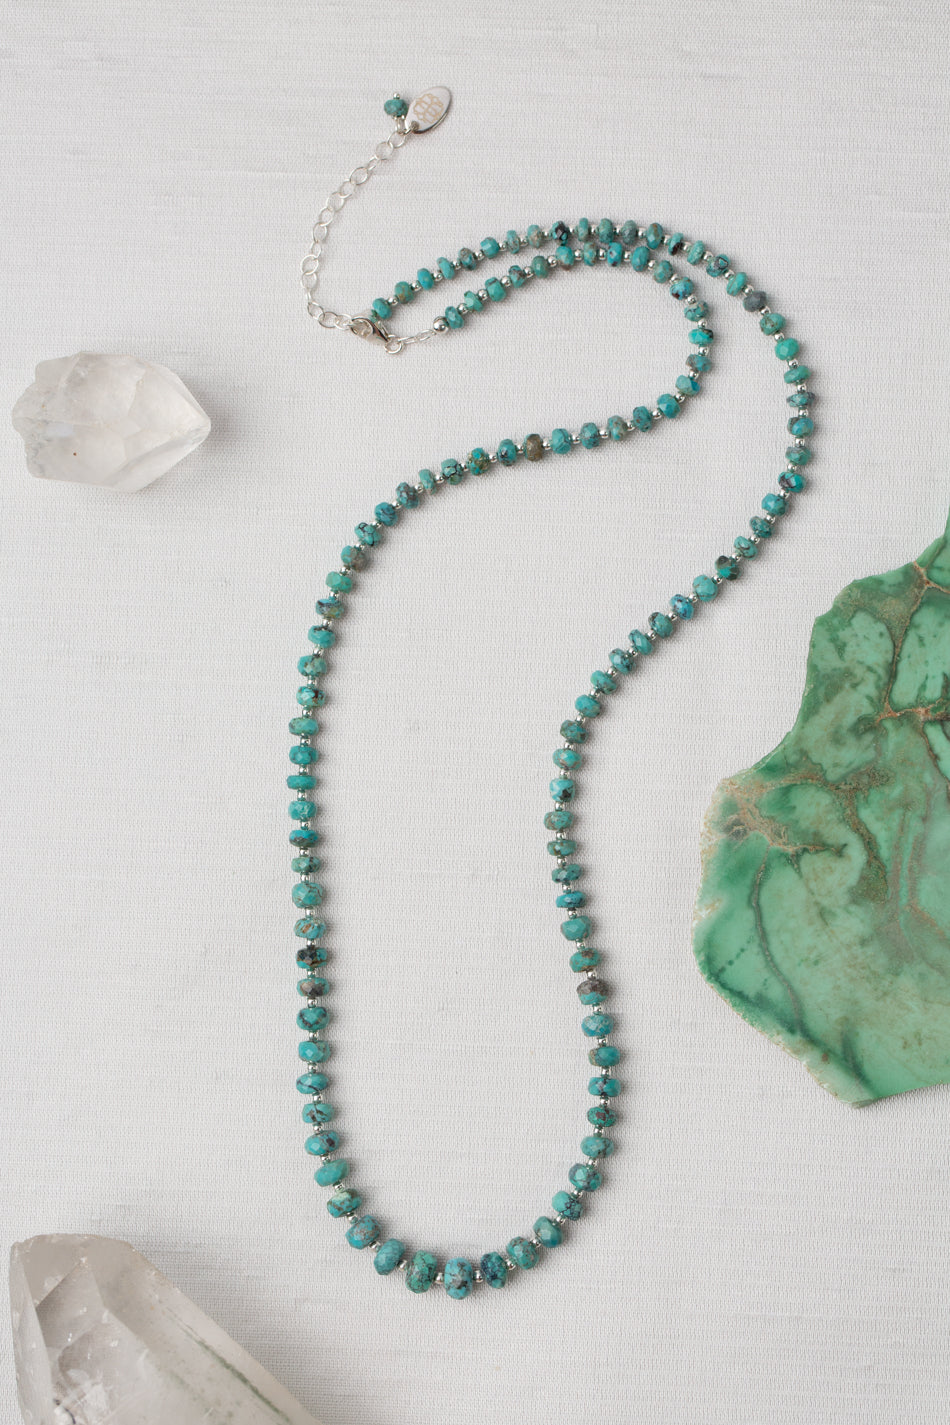 Limited 22-24" Natural Turquoise Simple Necklace